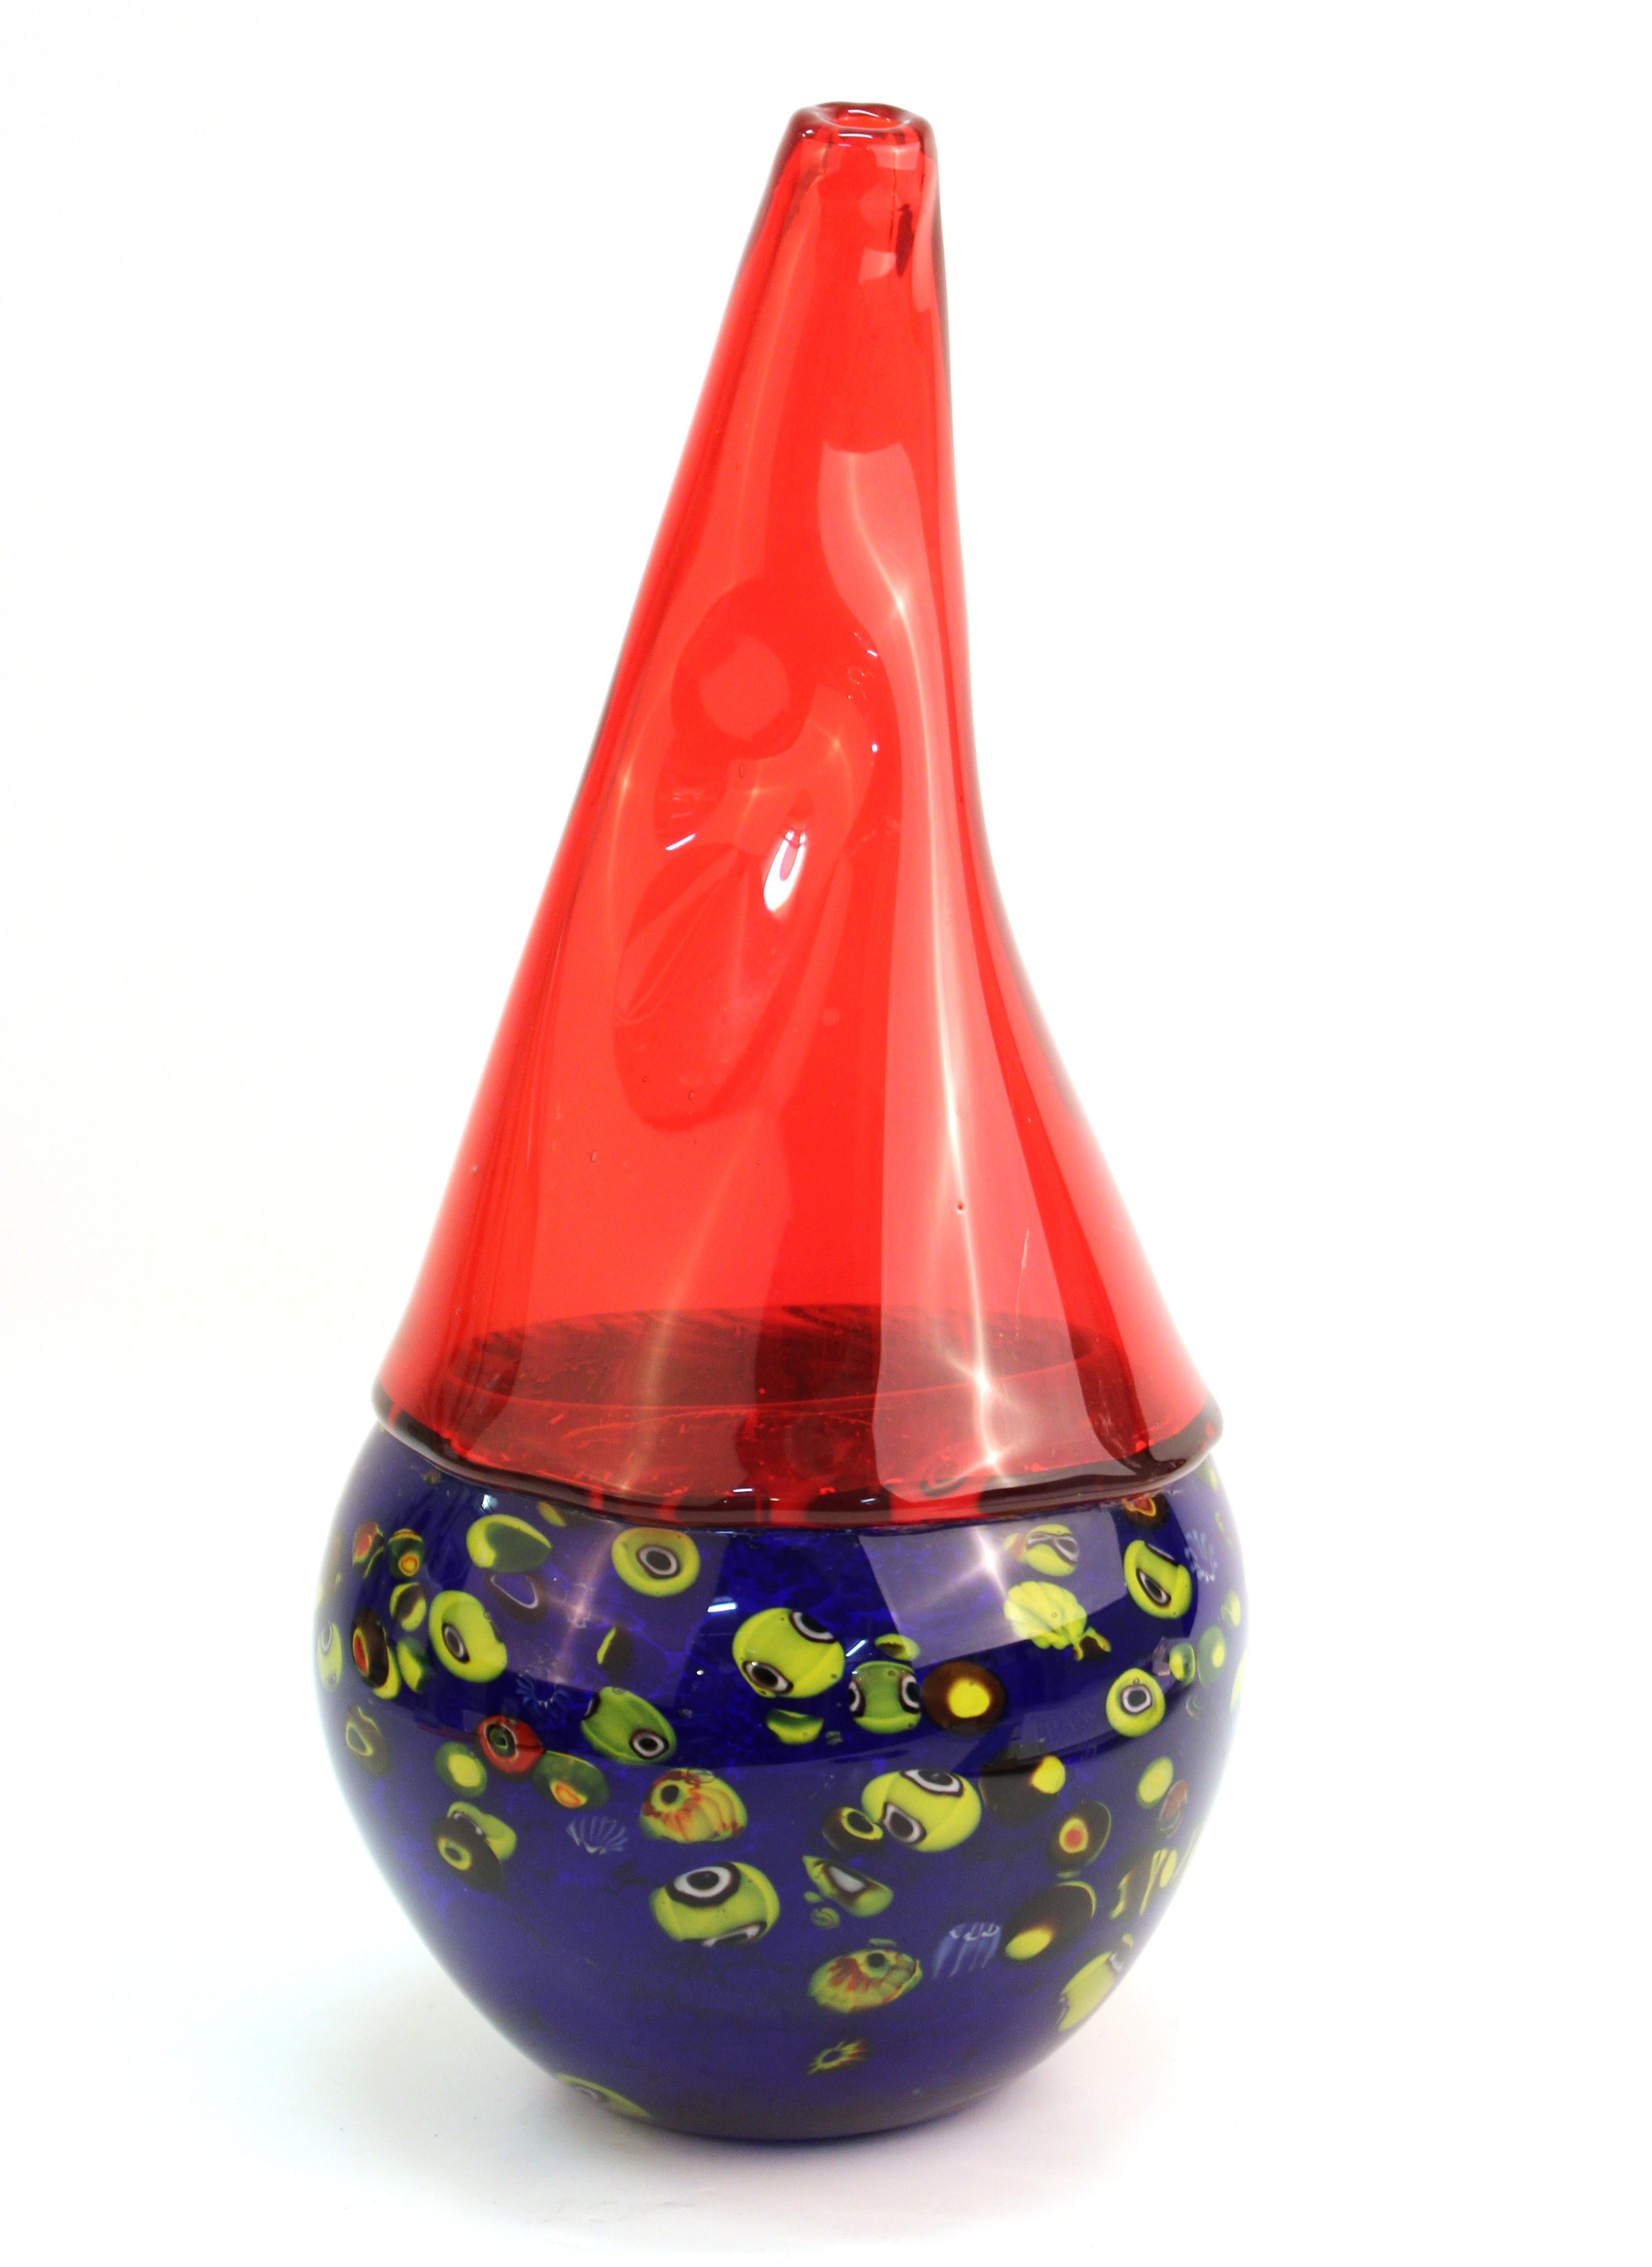 Italian Postmodern art glass vase from Murano, in shape of a gourd with clear red glass above a solid blue glass with murine inlay. Likely made in the late 20th century. Some light scratching to the base, but overall in great vintage condition with